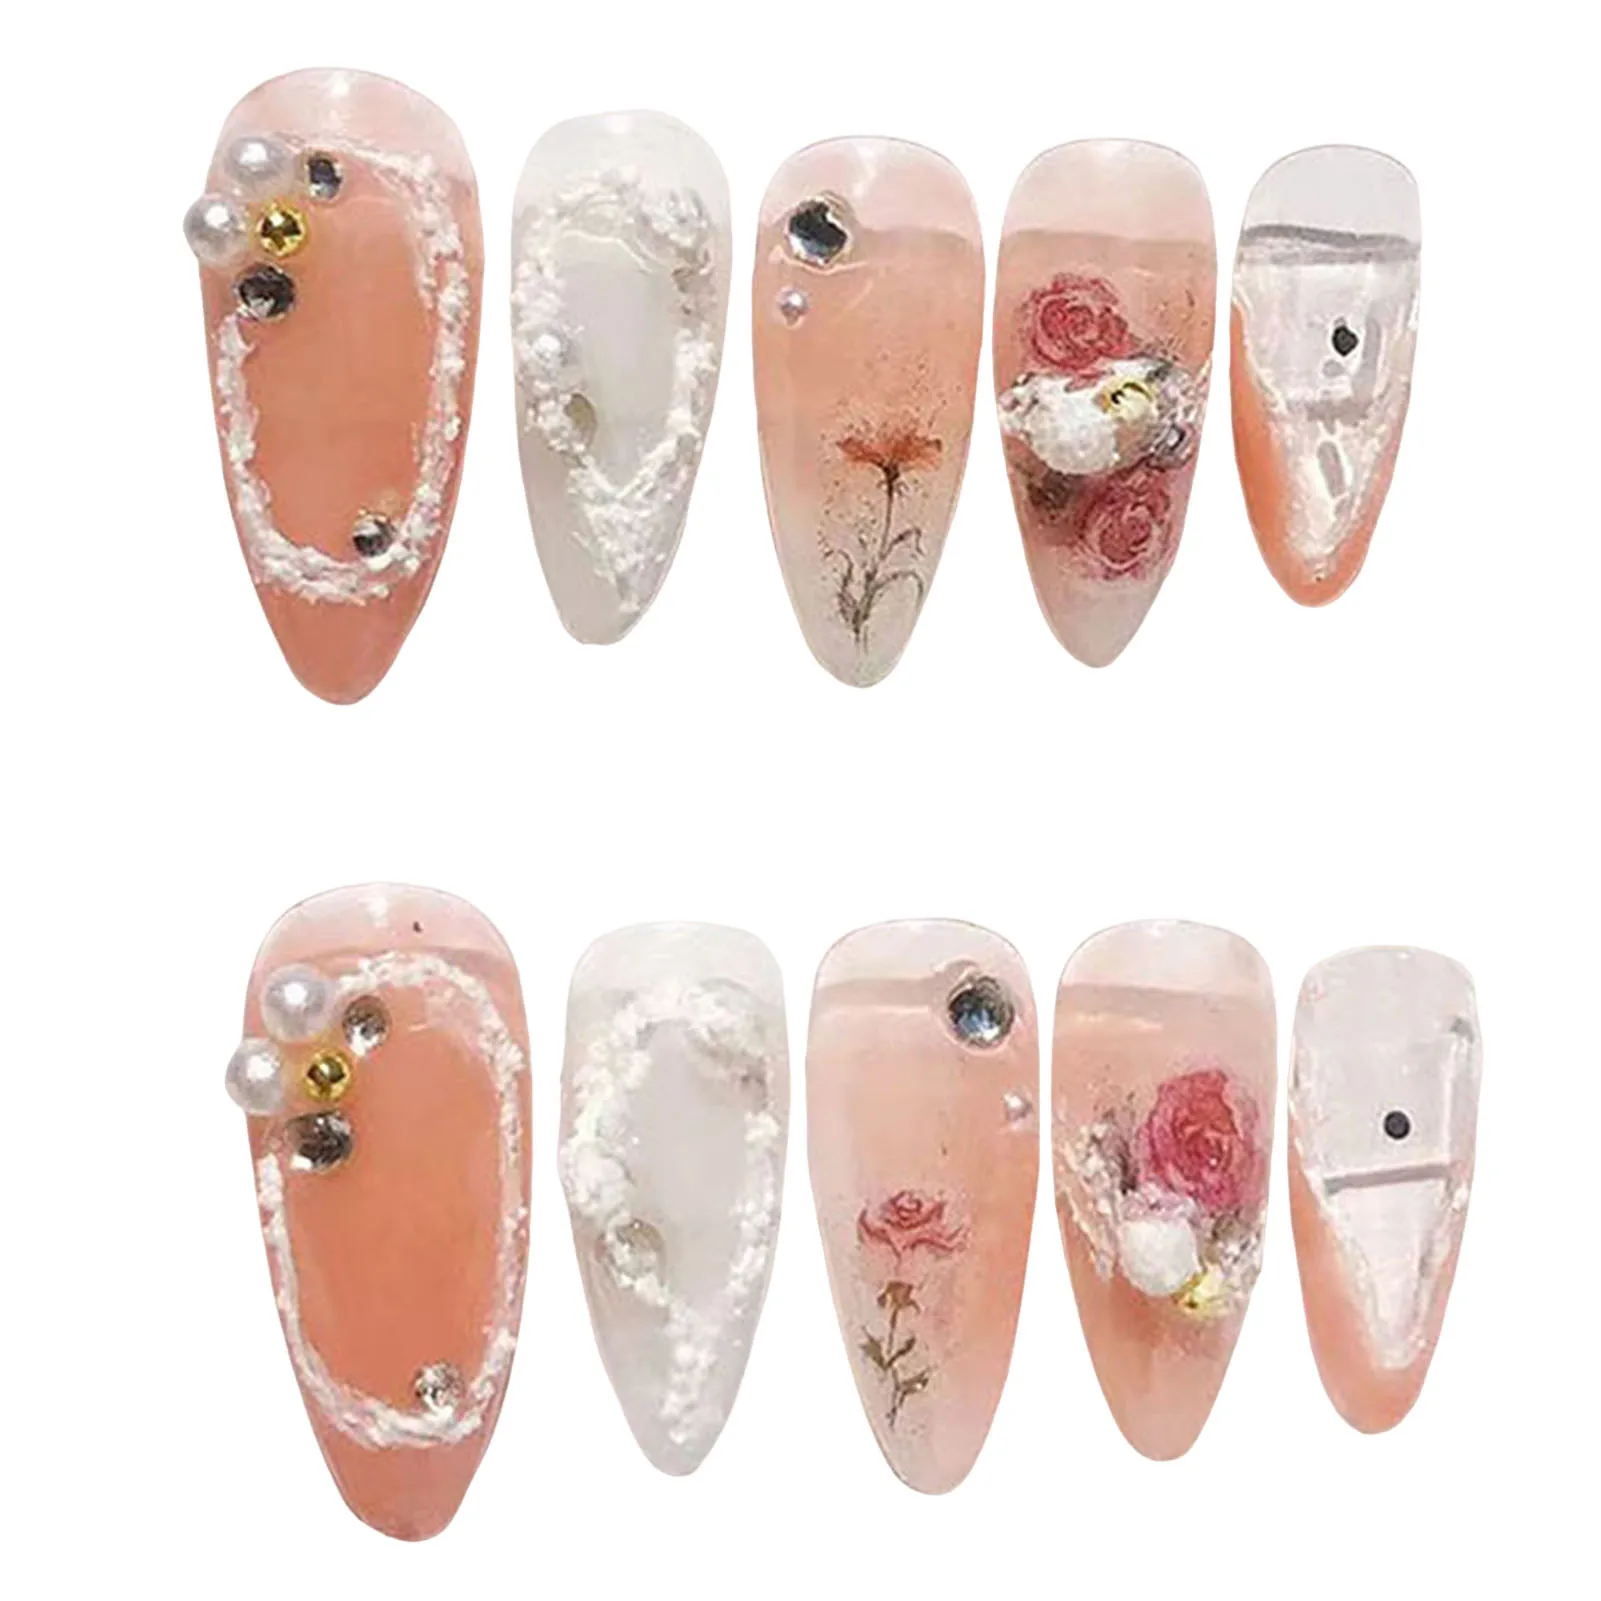 

Orange Fake Nails with Rose Printed Charming Comfortable to Wear Manicure Nails for Daily and Parties Wearing